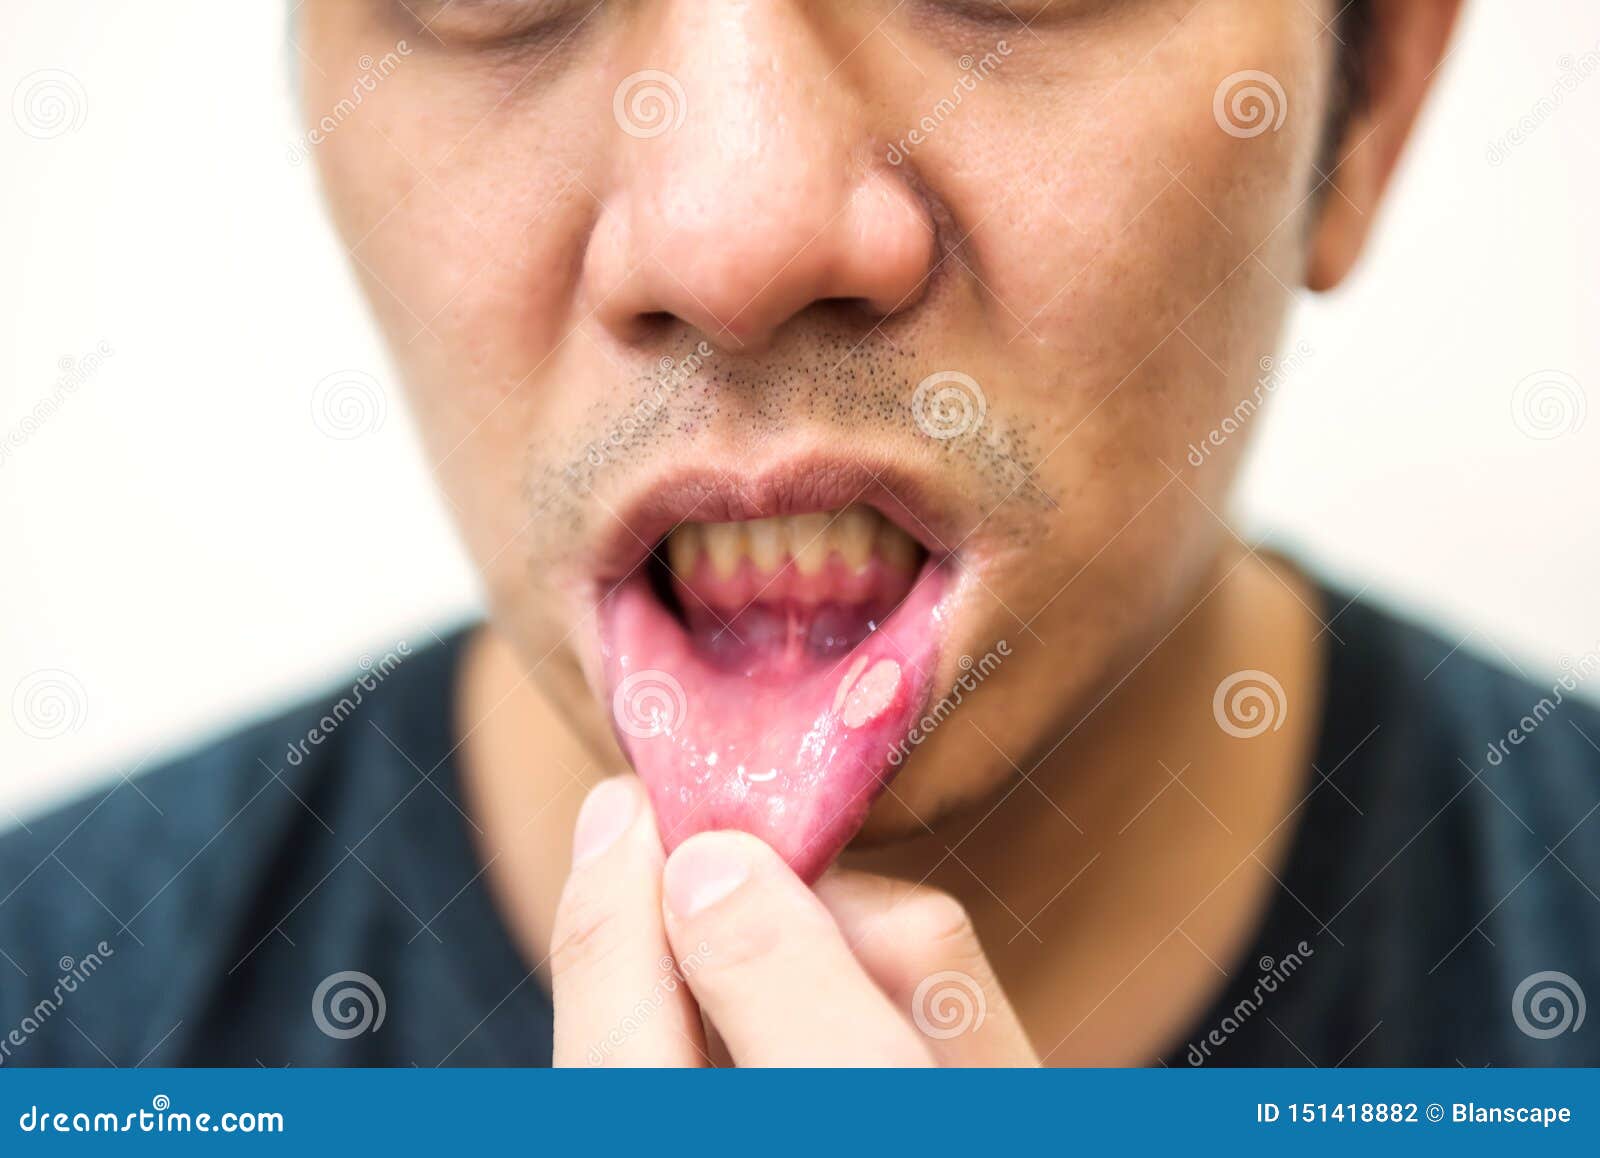 pained aphtha ulcer mouth from accident